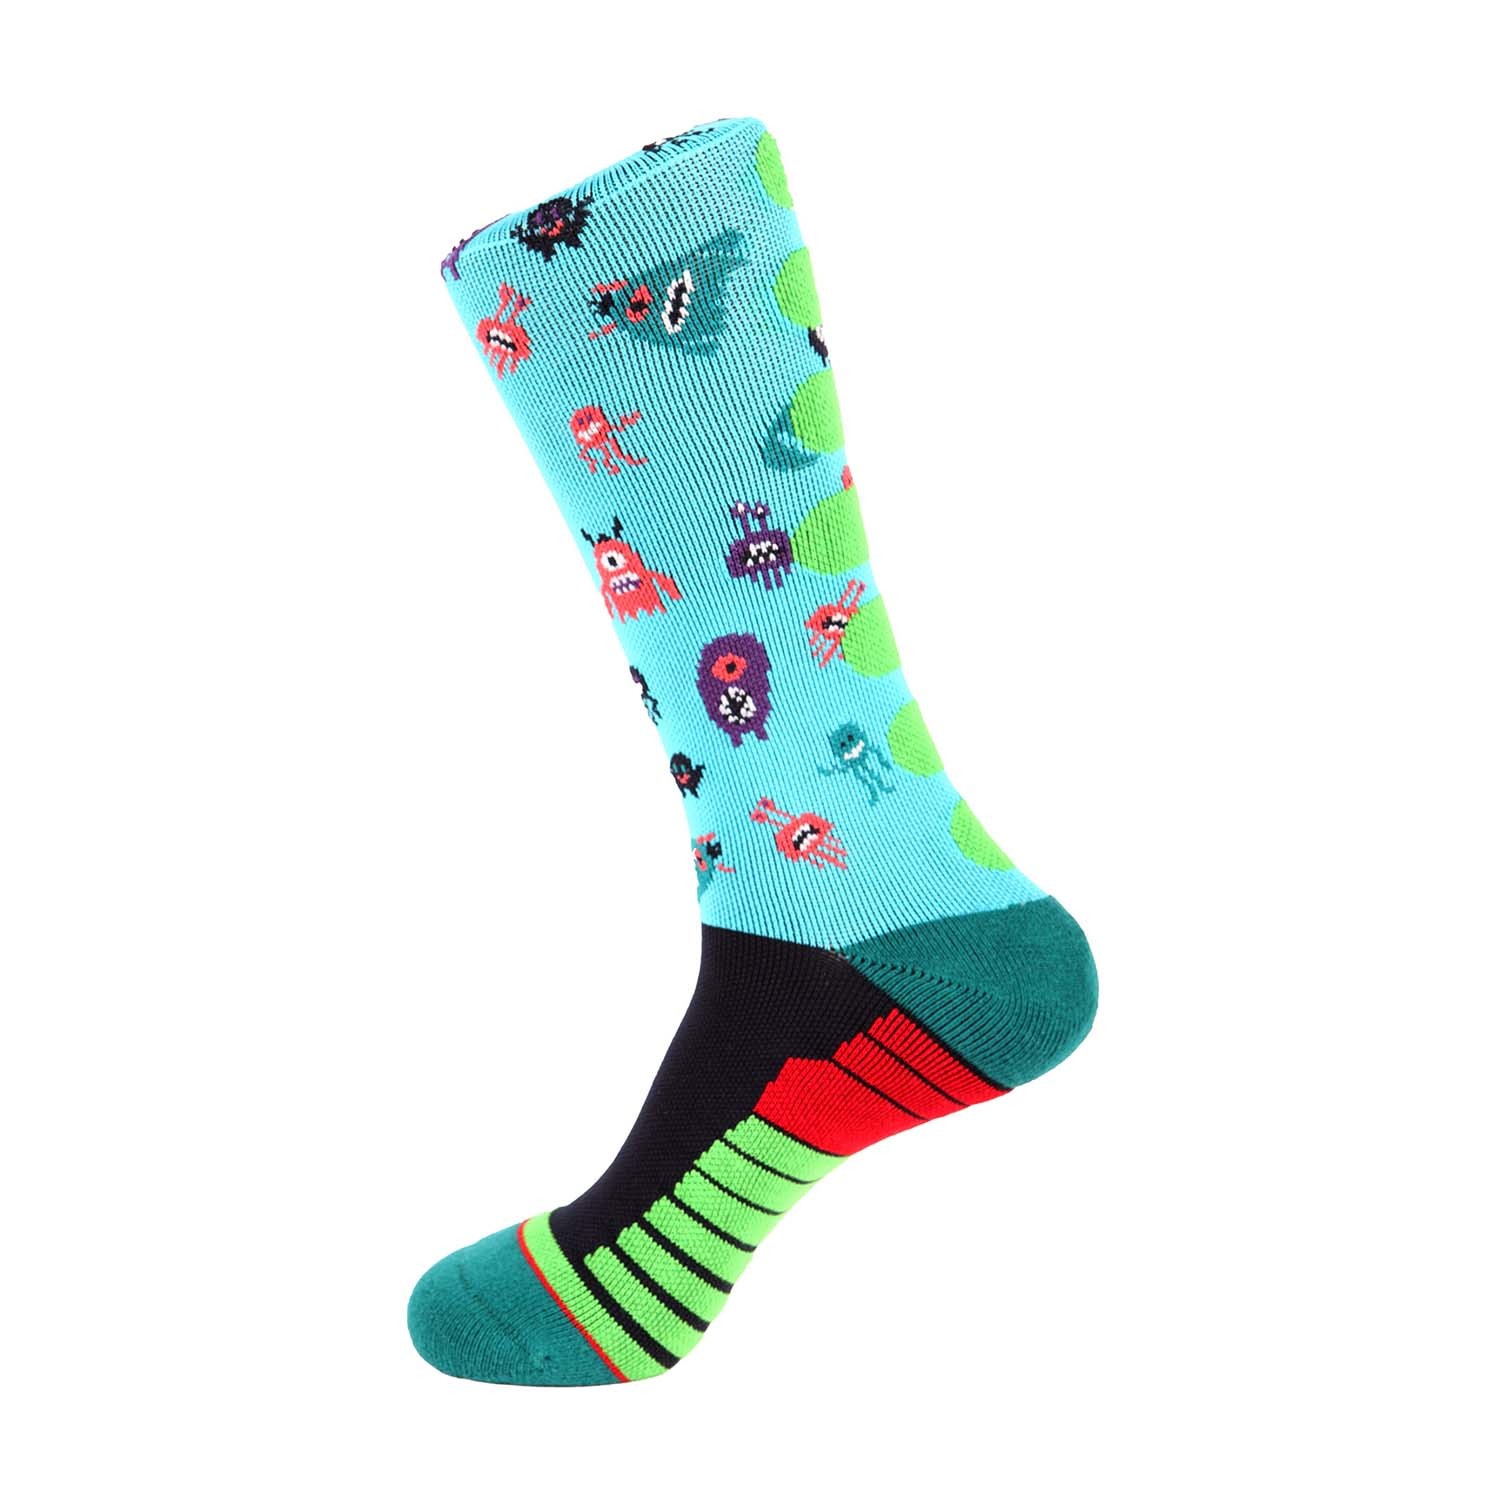 Monster Athletic Socks // Aqua Multi - Unsimply Stitched - Touch of Modern